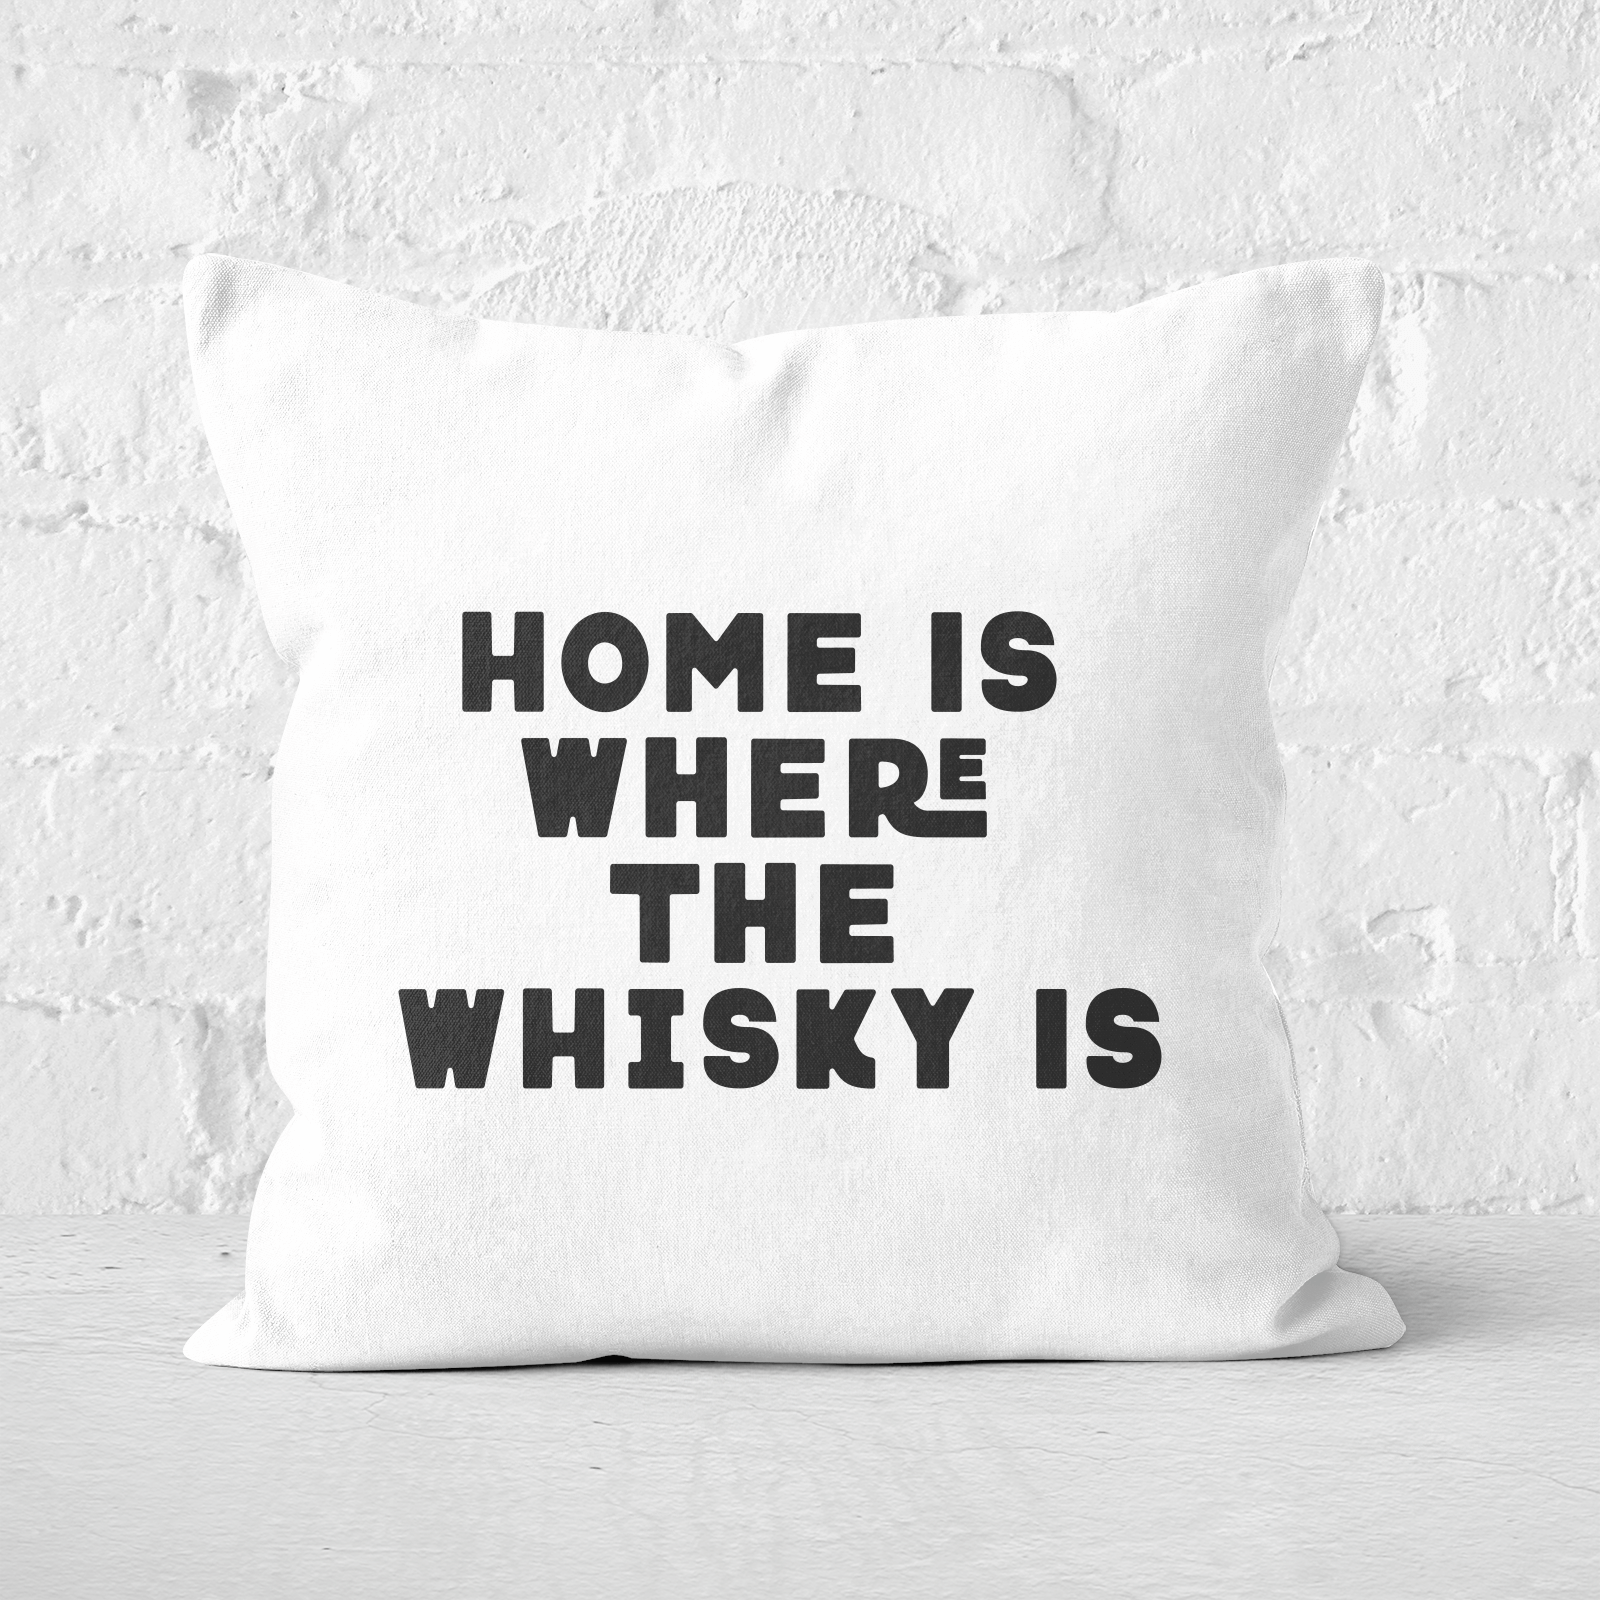 Home Is Where The Whisky Is Square Cushion - 60x60cm - Soft Touch